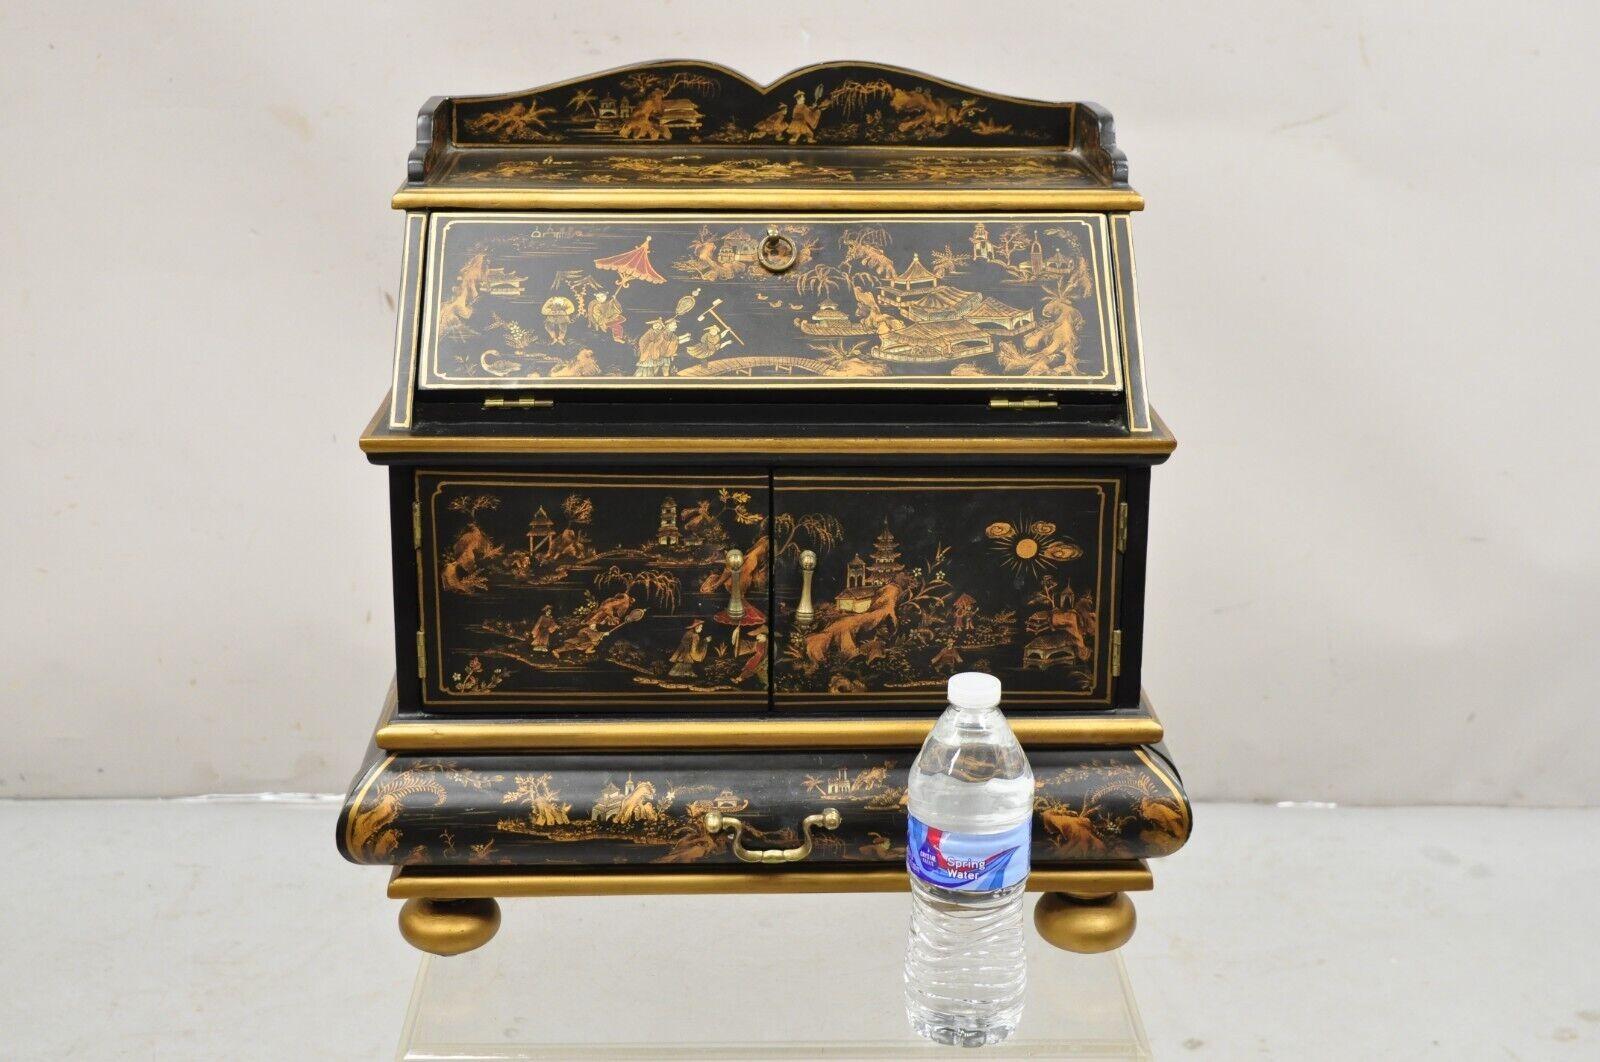 Decorative Chinoiserie Bombe Style Black Lacquer Oriental Jewelry Box. Circa Late 20th - Early 21st Century. Measurements: 19